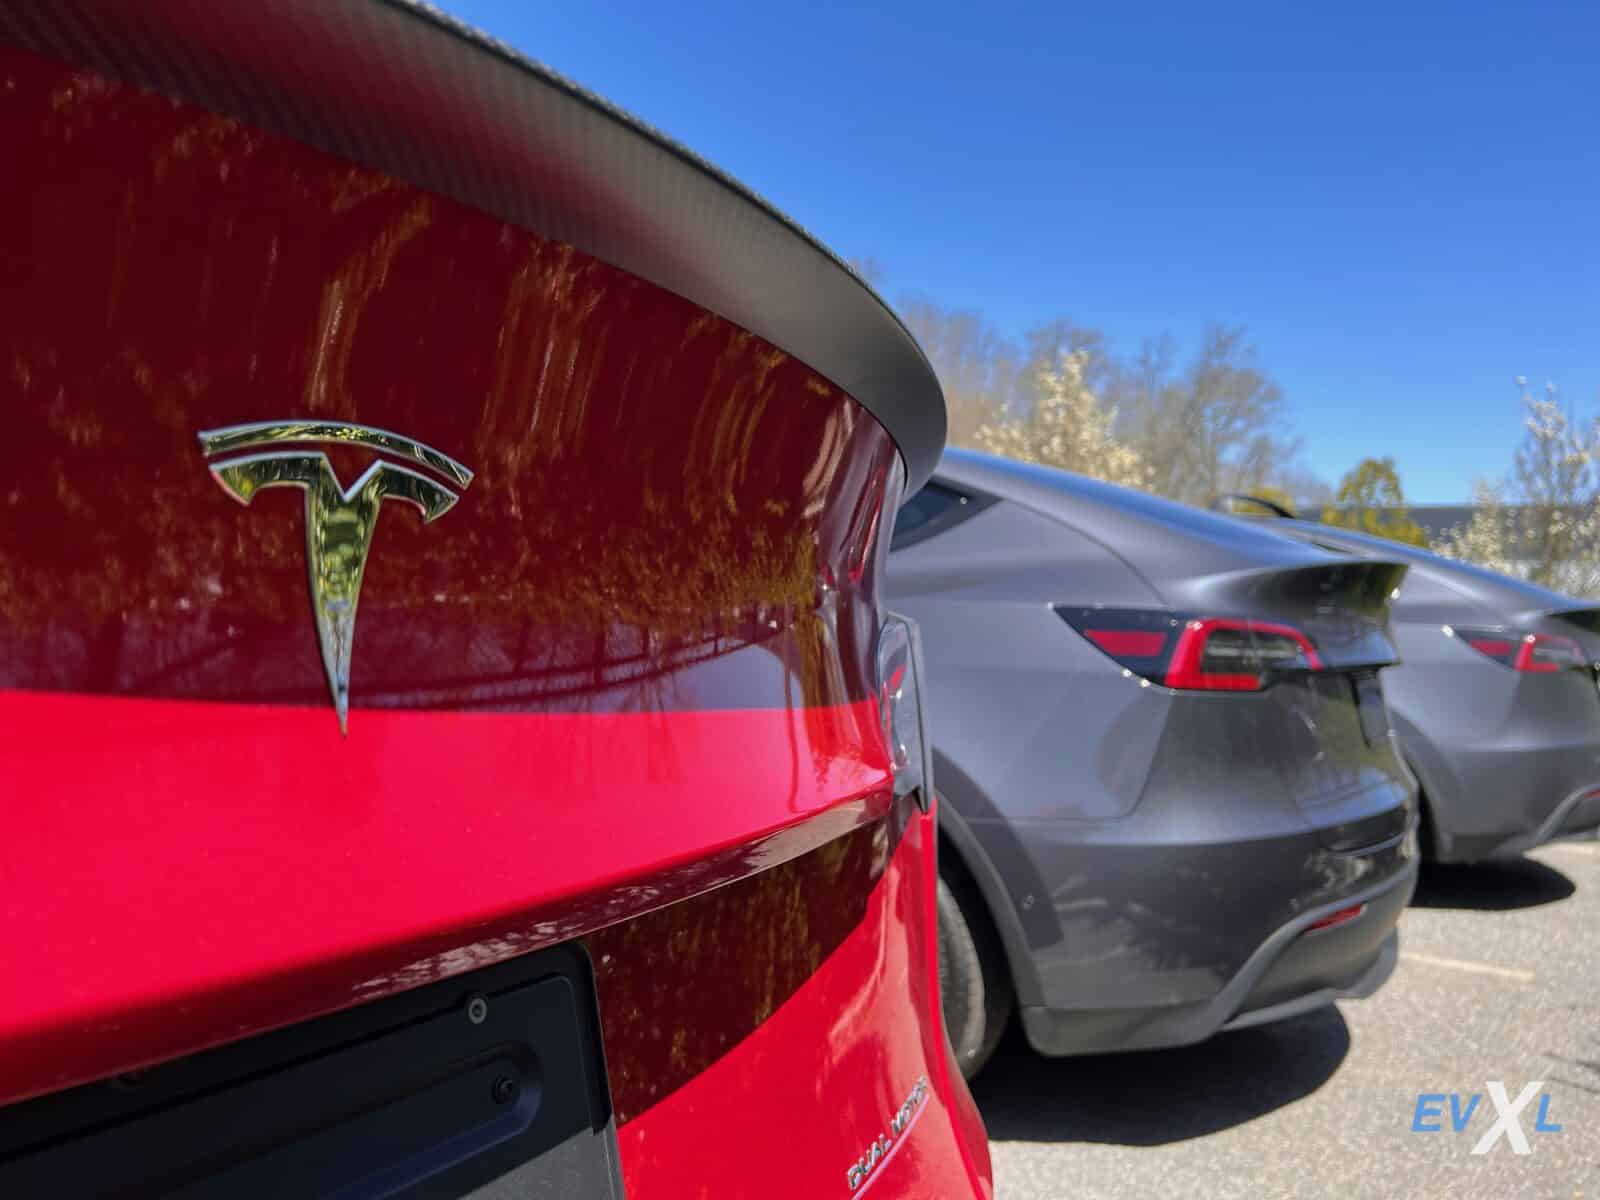 Electric Vehicle (Ev) Industry Pioneer, Tesla Inc., Is Due To Release Its Second-Quarter Sales And Production Figures In The Next Few Days. This Anticipation Comes As The Company'S Stock Battles To Sustain Its Momentum After An Exceptional Surge Earlier This Month.